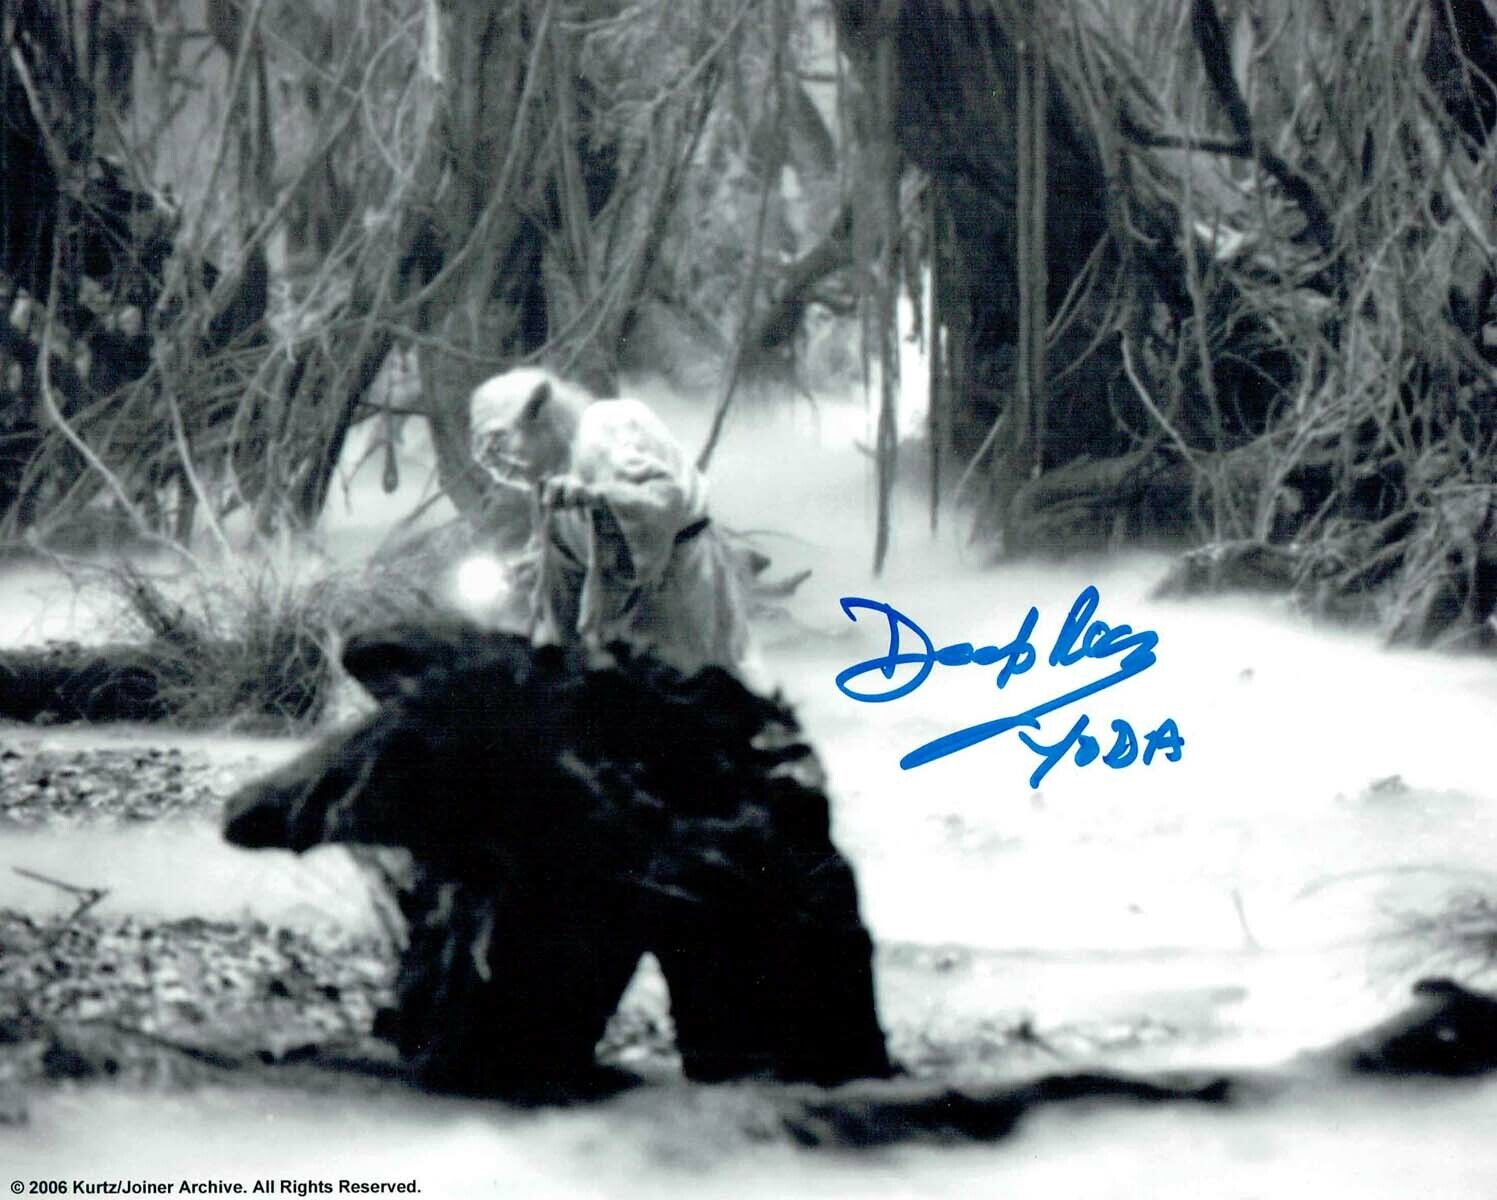 Deep ROY SIGNED Autograph 10x8 Photo Poster painting 1 AFTAL COA Jedi Master YODA Star Wars